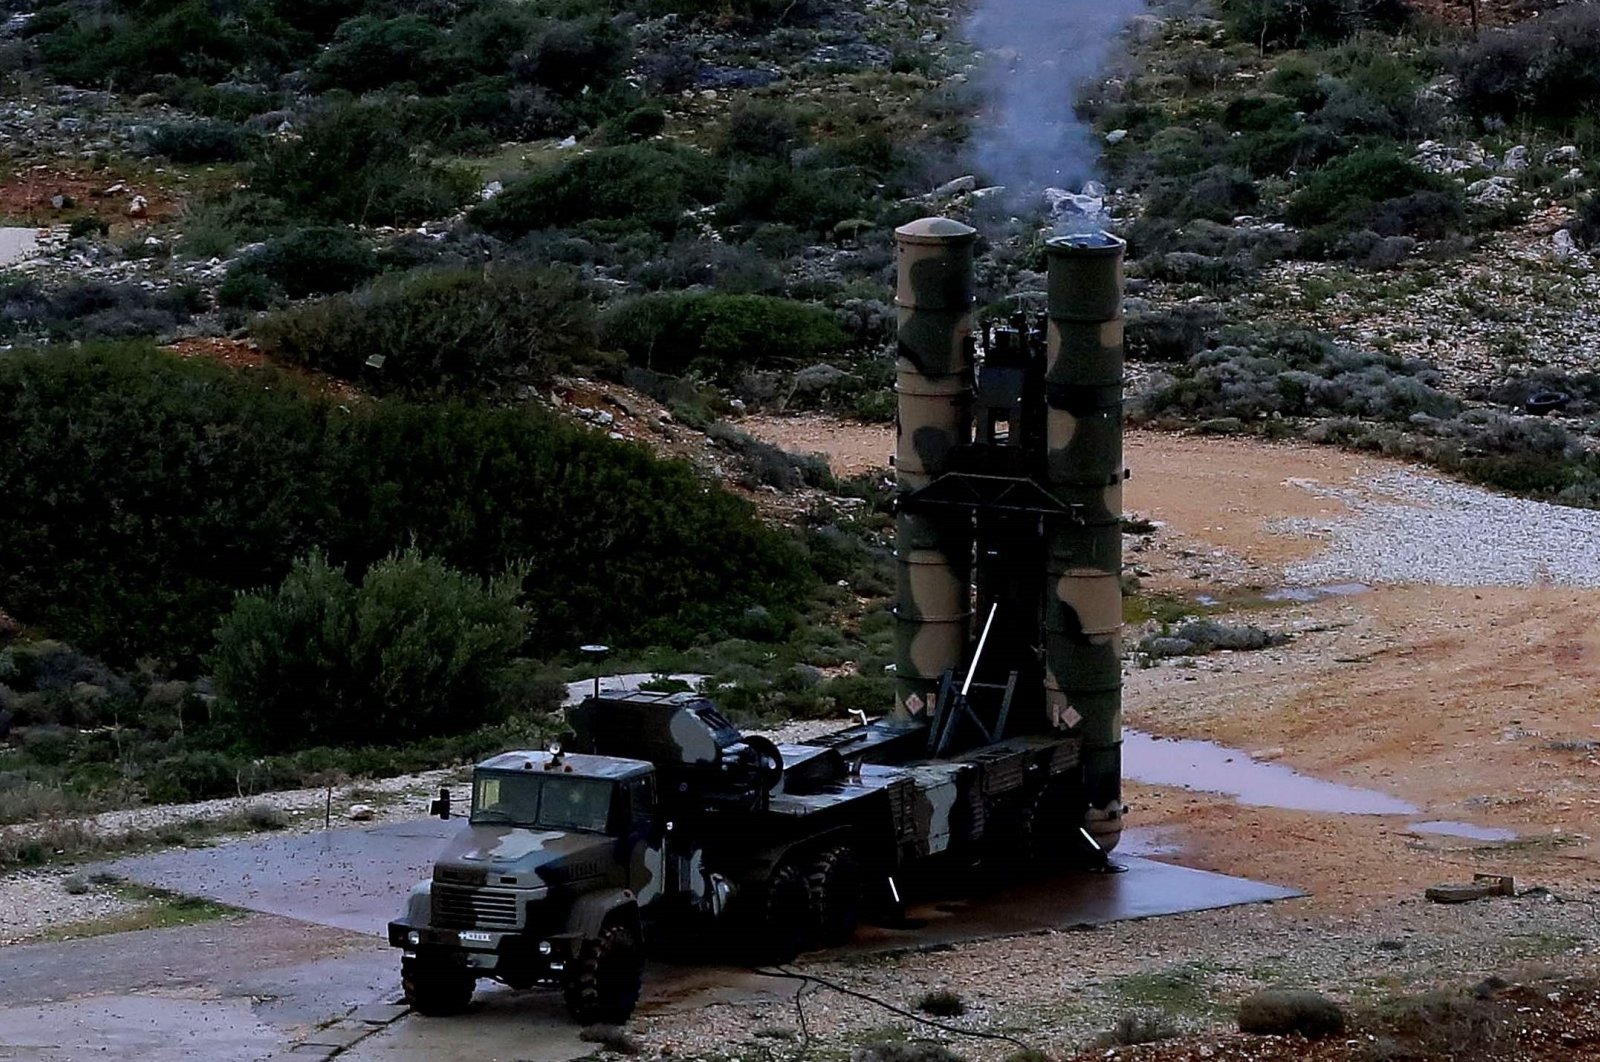 An S-300 PMU-1 anti-aircraft missile launches during a Greek army military exercise near Chania on the island of Crete, Dec. 13, 2013. (AFP Photo)